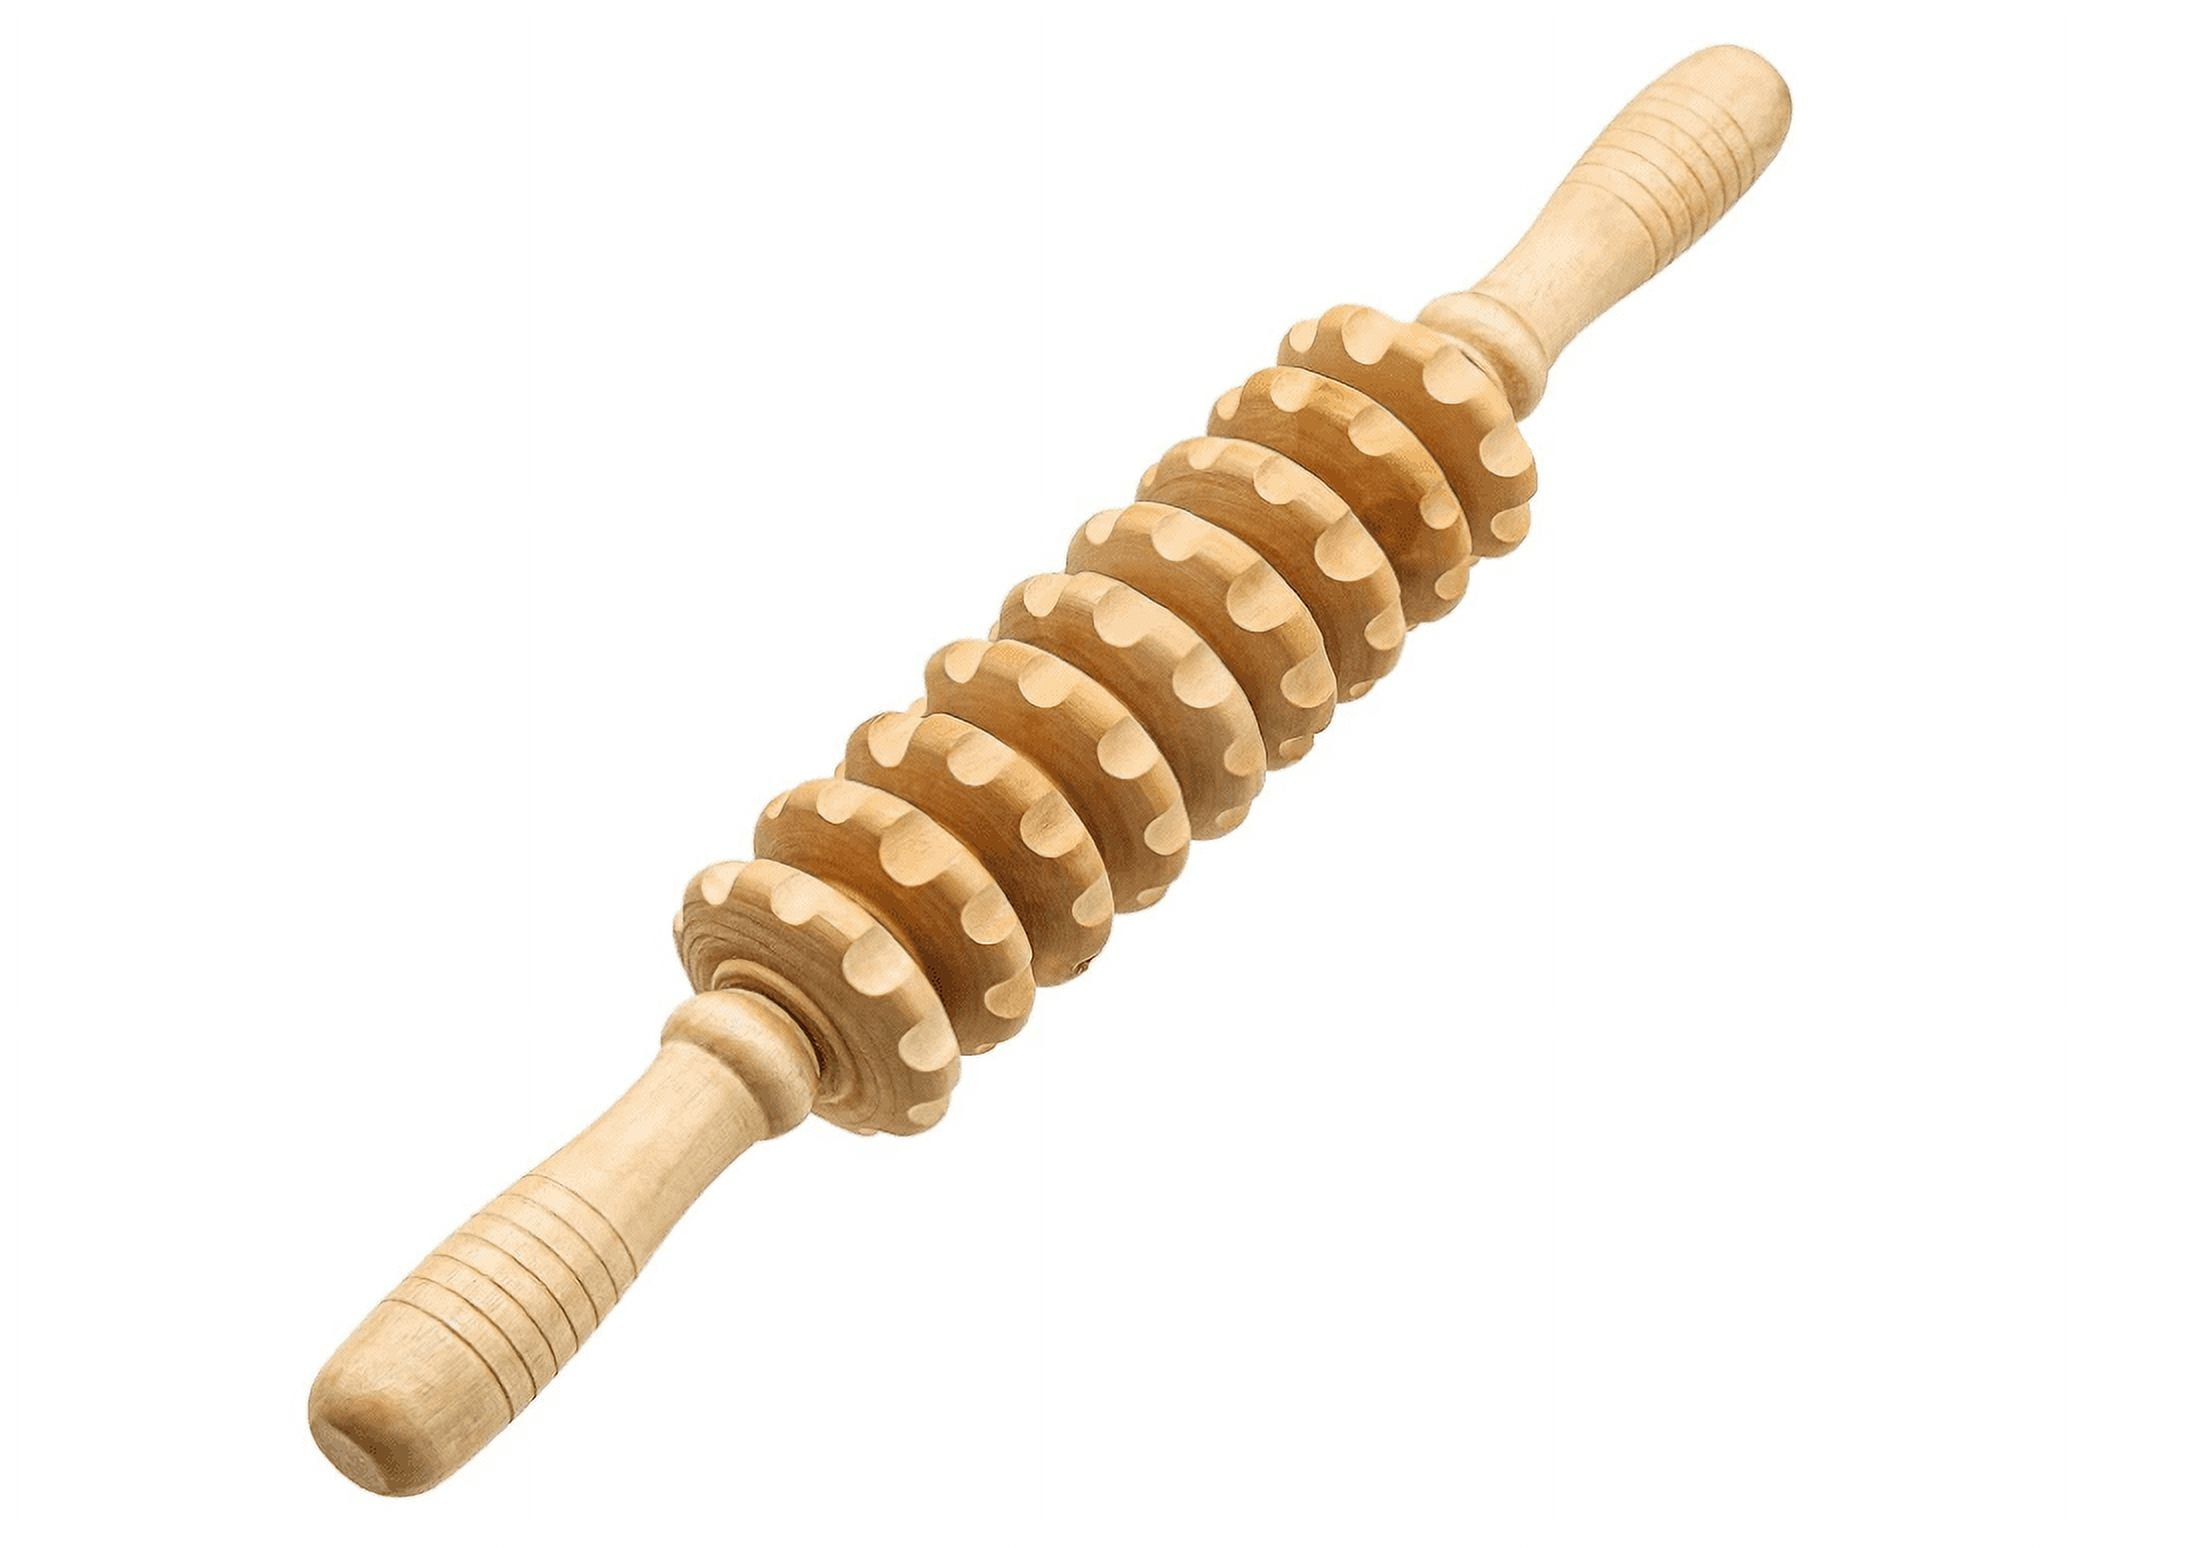 Mr. Woodware Wooden Curved Massage Stick Roller - 15.6 inch Wood Roller  Massager for Body, Waist, Thigh, Belly, Legs Muscle - Manual Self Therapy